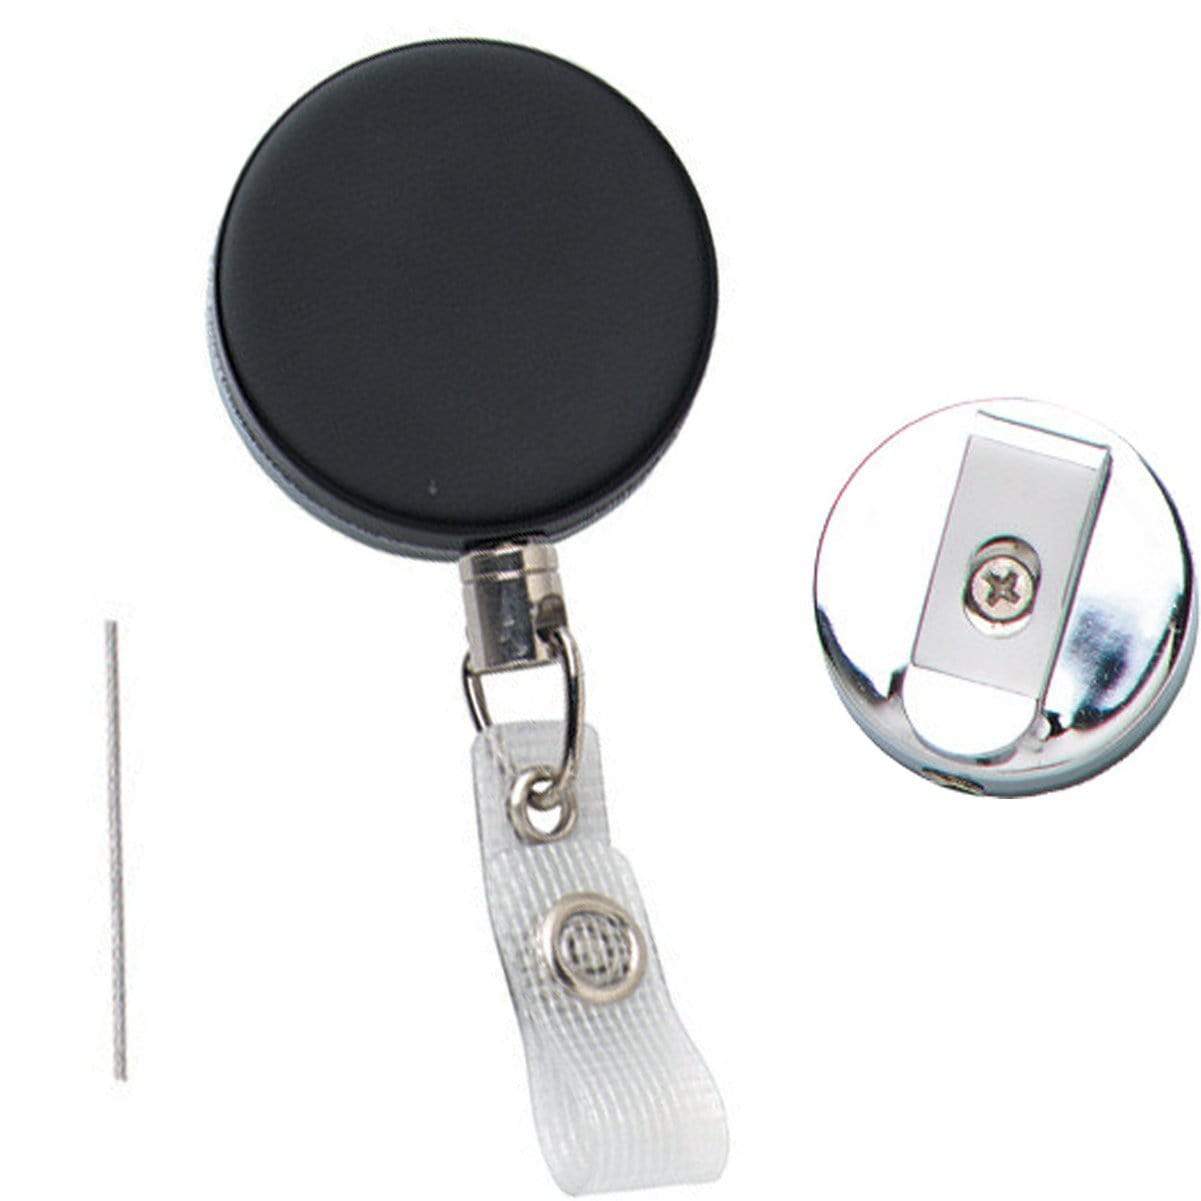 Black Retractable Badge Reel with Lanyard Attachment On Top (Attaches to Your Favorite Lanyard) by Specialist ID